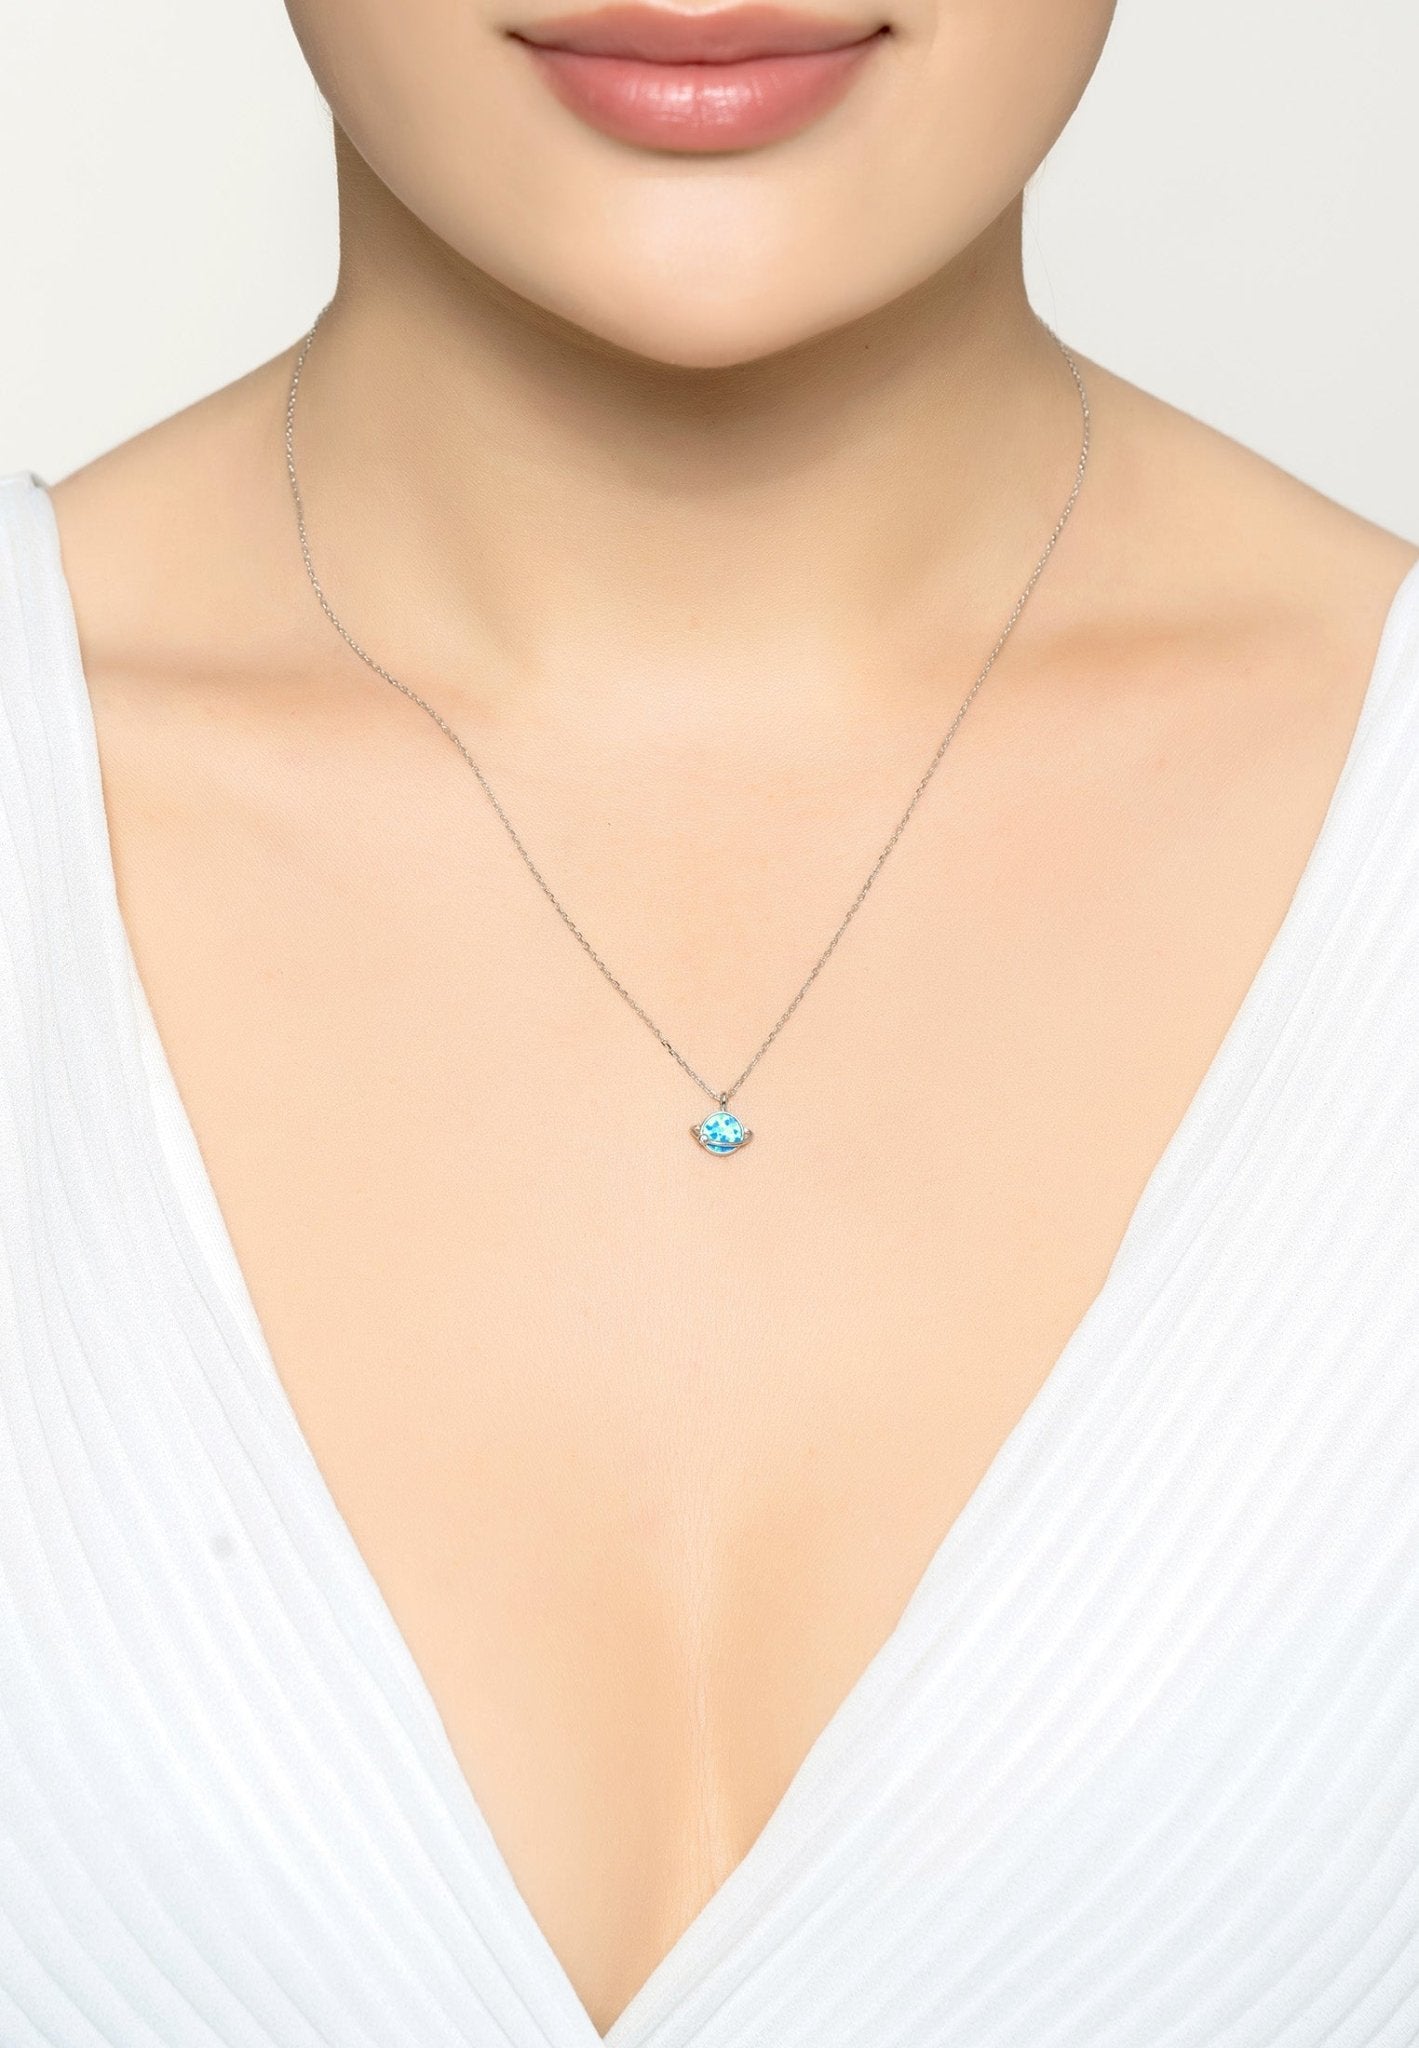 Saturn Galactic Opalite Necklace Silver - LATELITA Necklaces